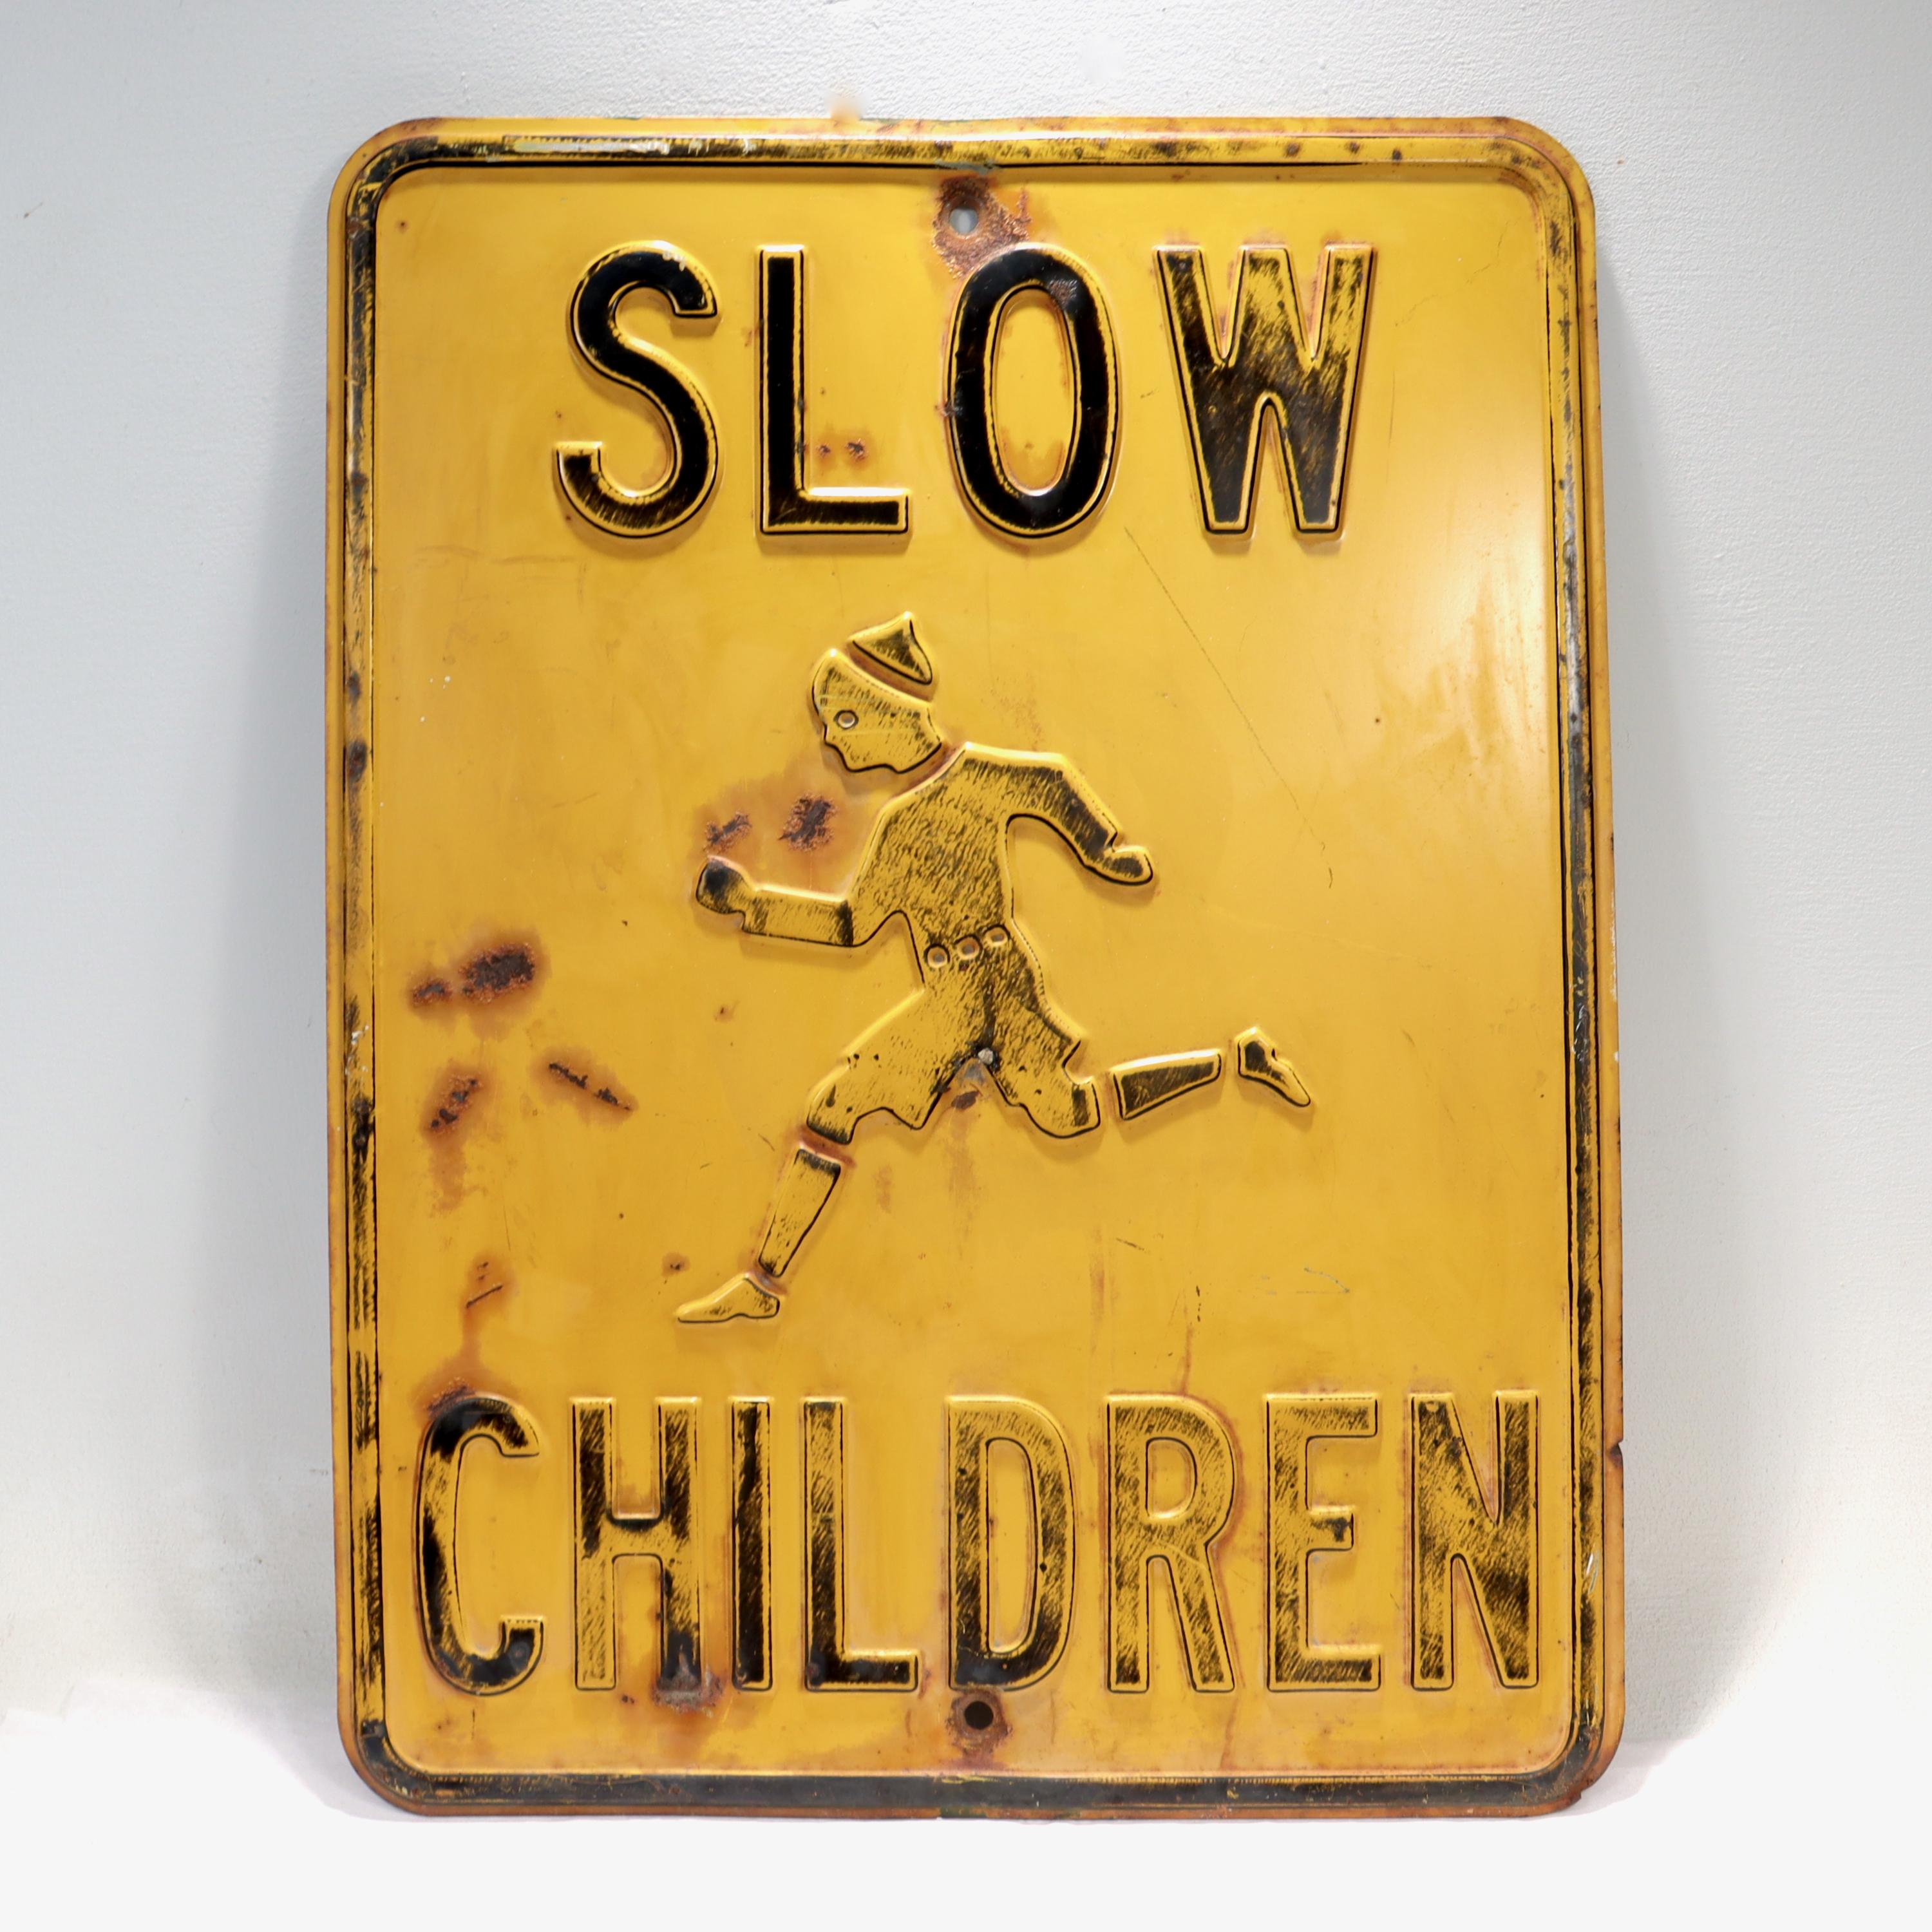 A fine vintage traffic or street sign.

With graphics of a child running & large block letters spelling: 'SLOW CHILDREN'. 

Simply a great vintage sign!

Date:
Mid-20th Century

Overall Condition:
It is in overall good, as-pictured, used